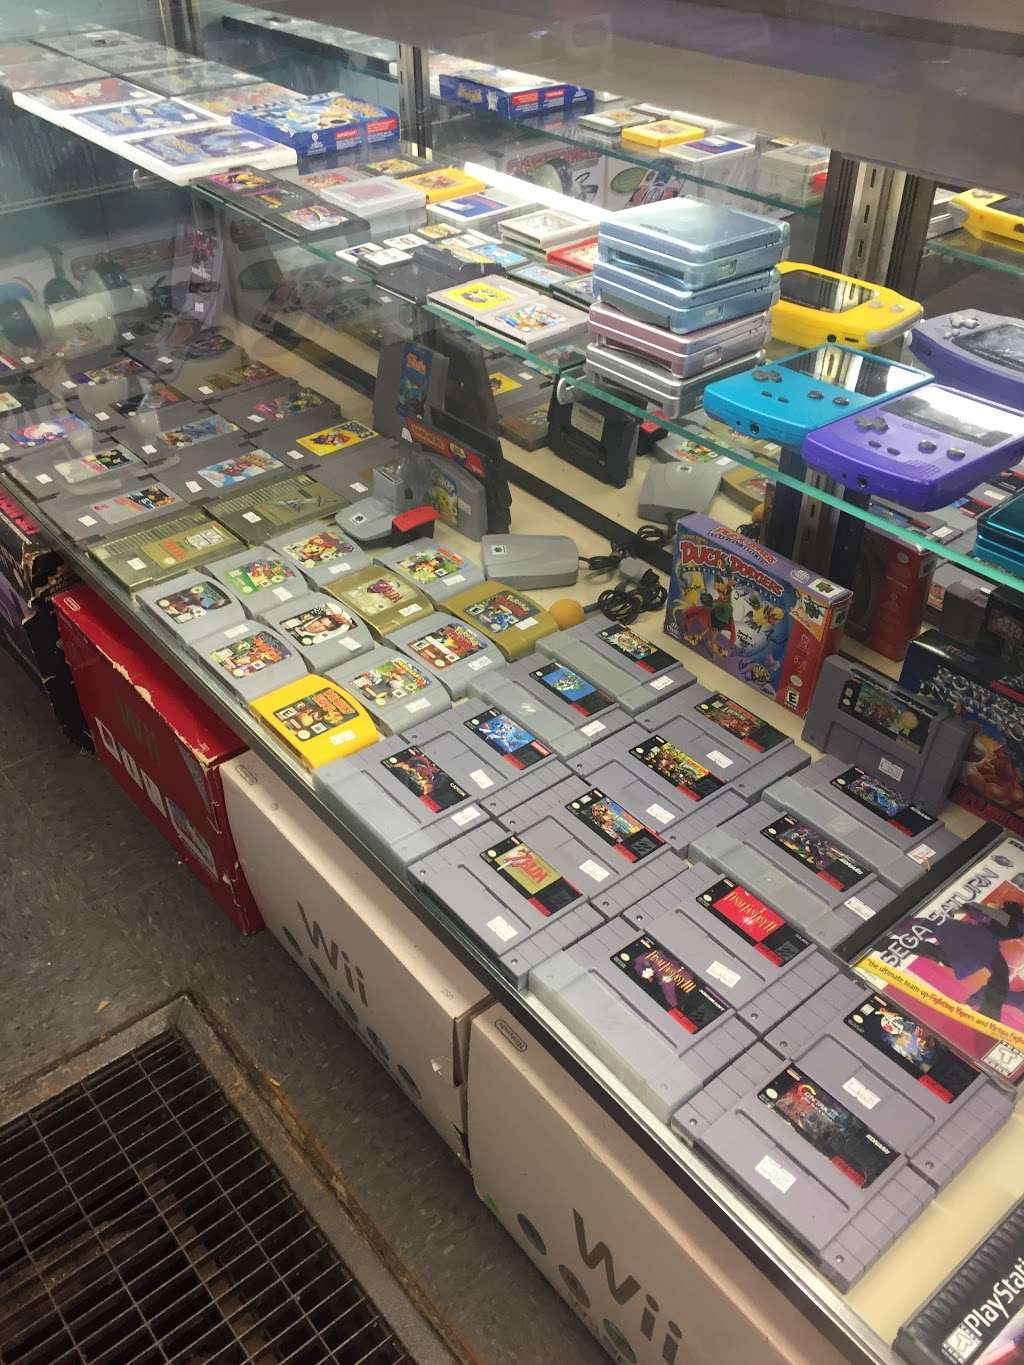 Merrimac Games and Collectables | 10 Church St, Merrimac, MA 01860 | Phone: (978) 384-8237